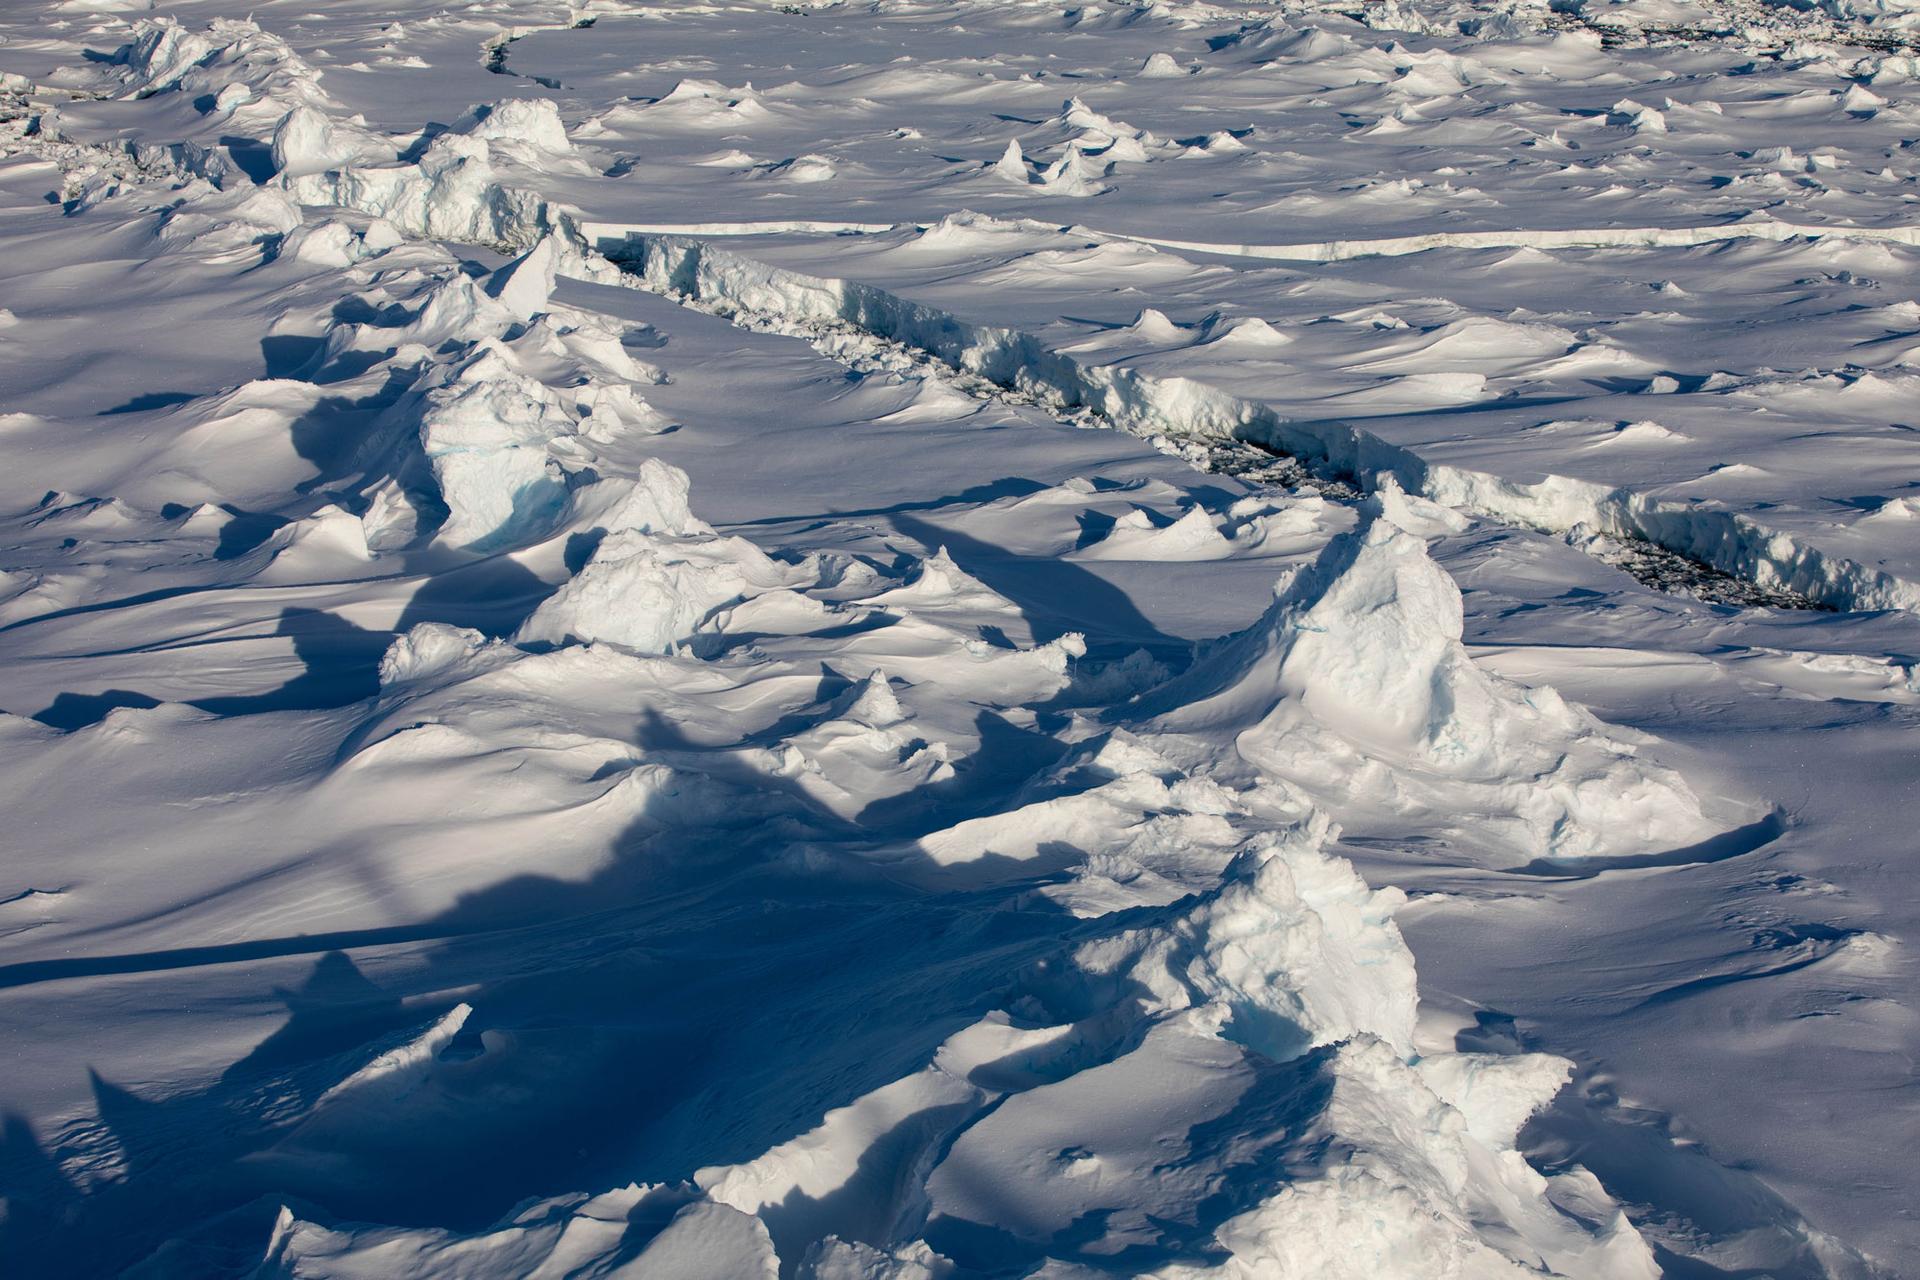 As it ages, large white pieces of ice crash into each other to form pressure ridges in a photo with a thin water path through the two sides.